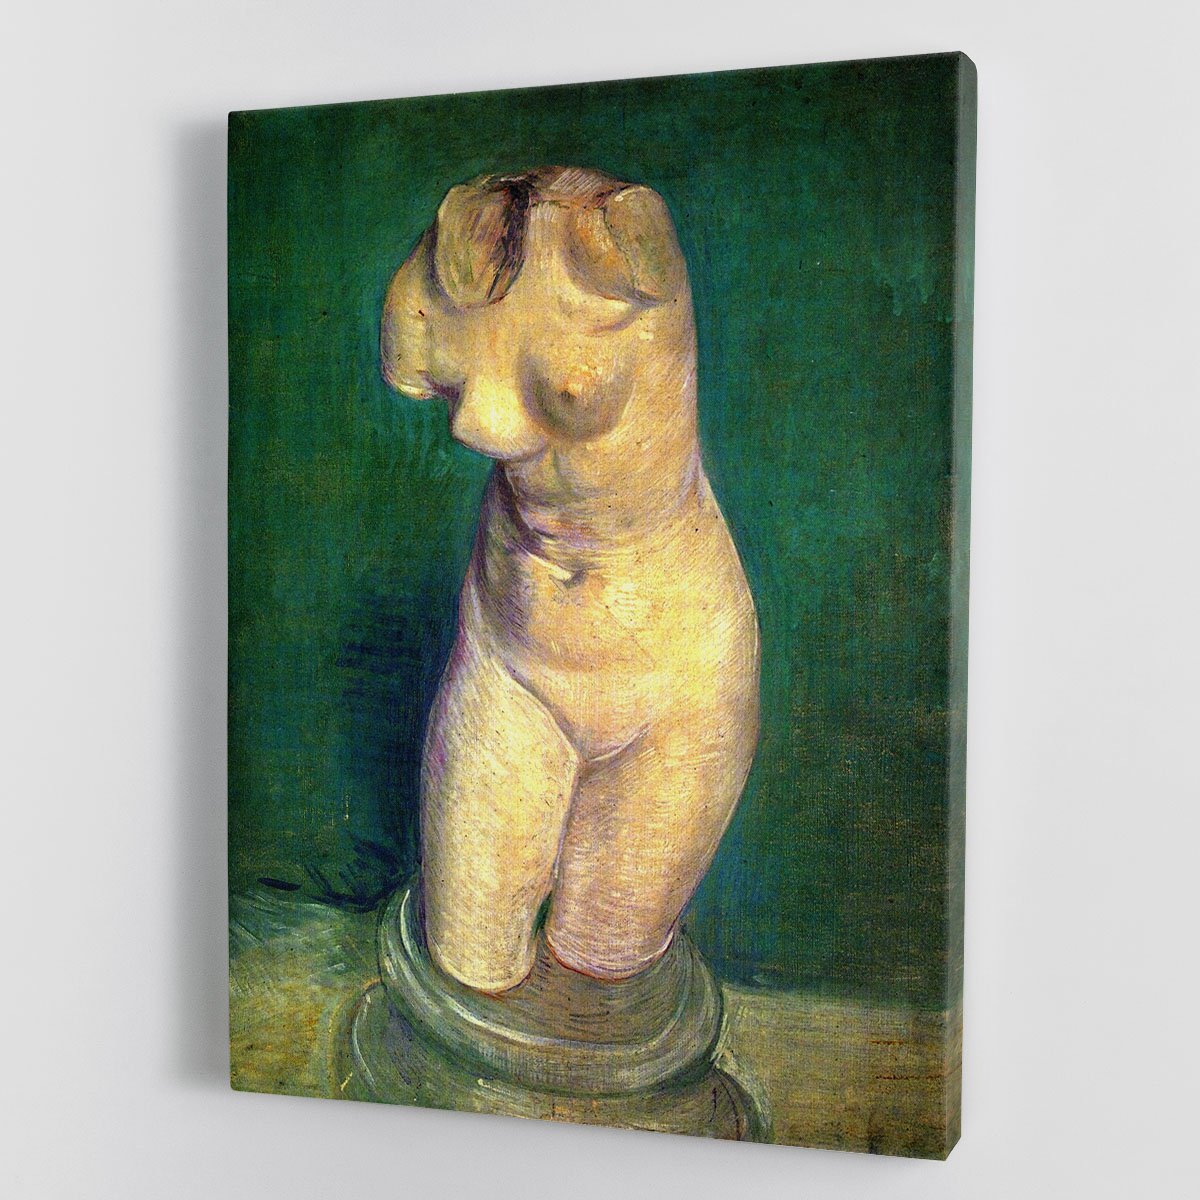 Plaster Statuette of a Female Torso by Van Gogh Canvas Print or Poster